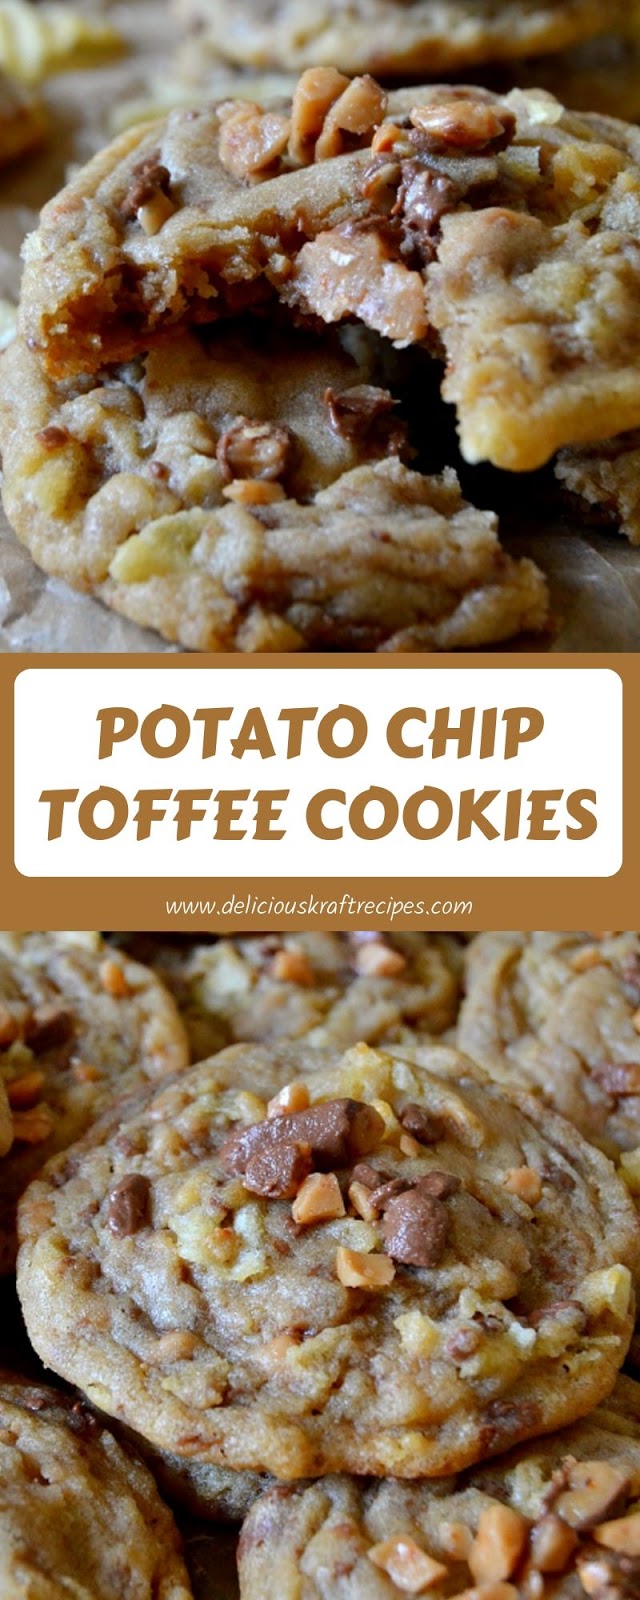 POTATO CHIP TOFFEE COOKIES